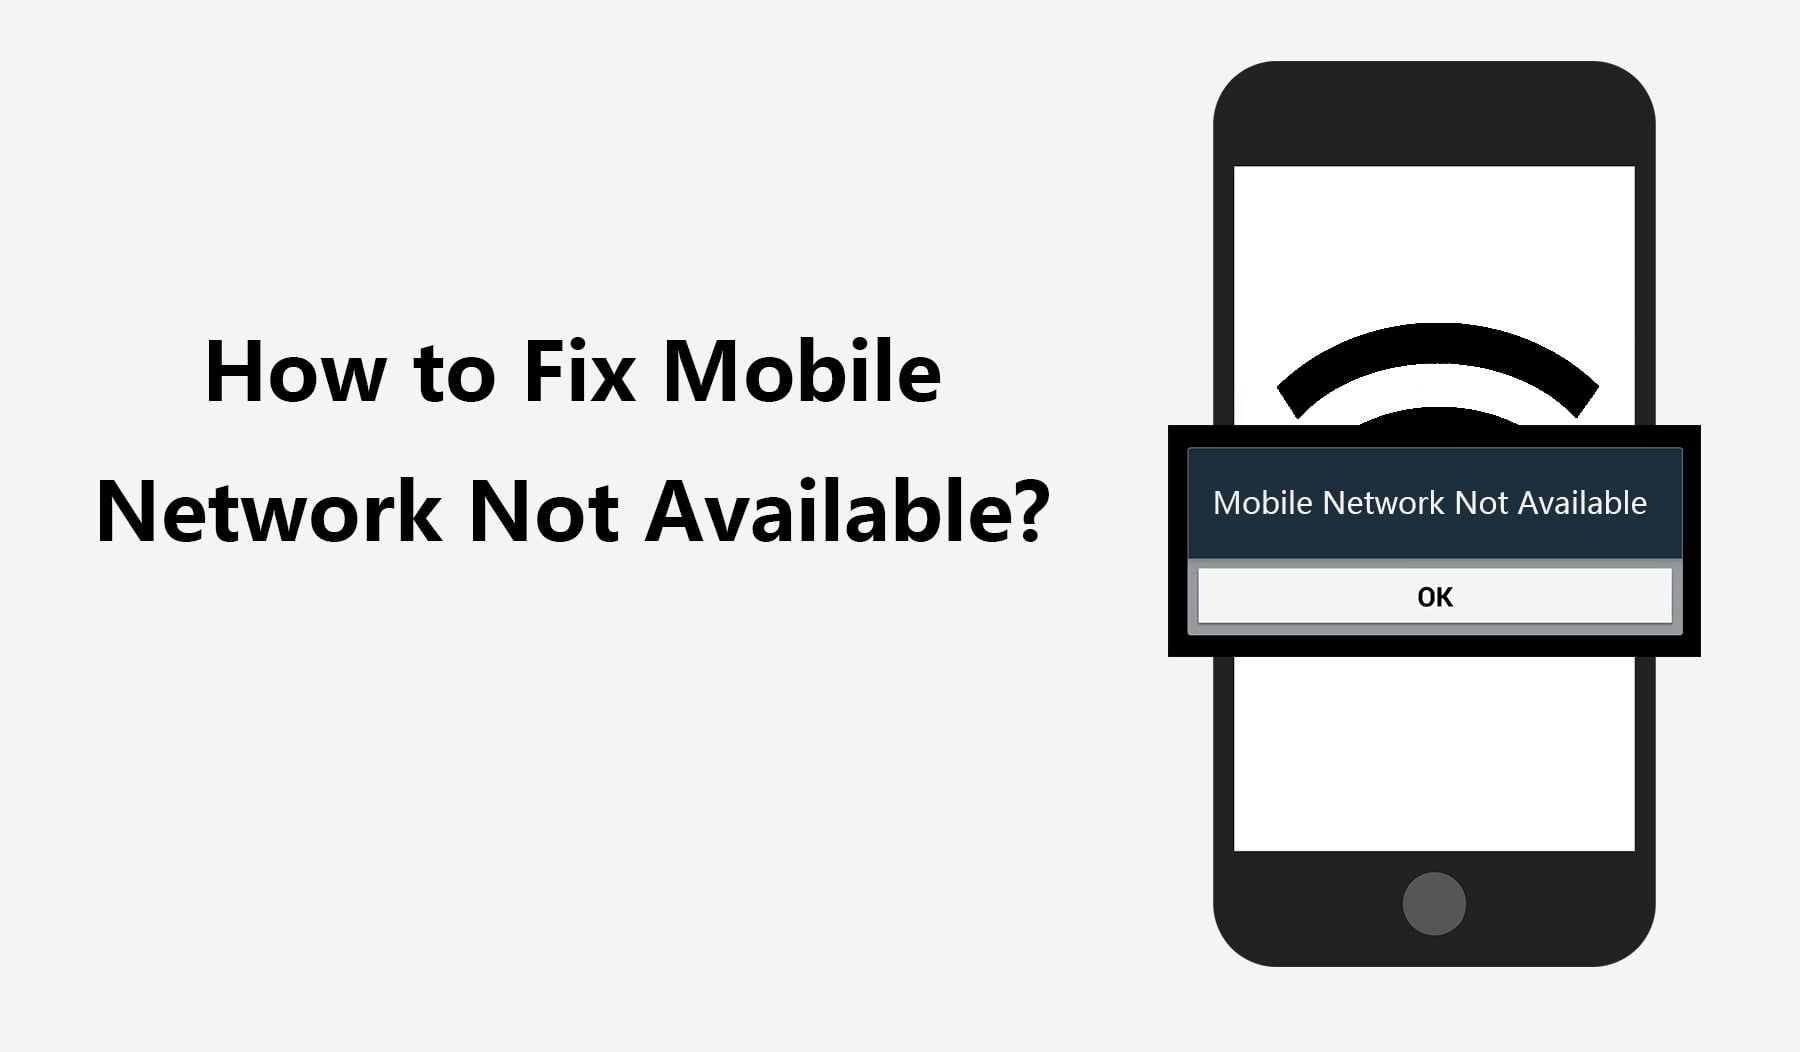 Why Does My Phone Say Mobile Network Not Available